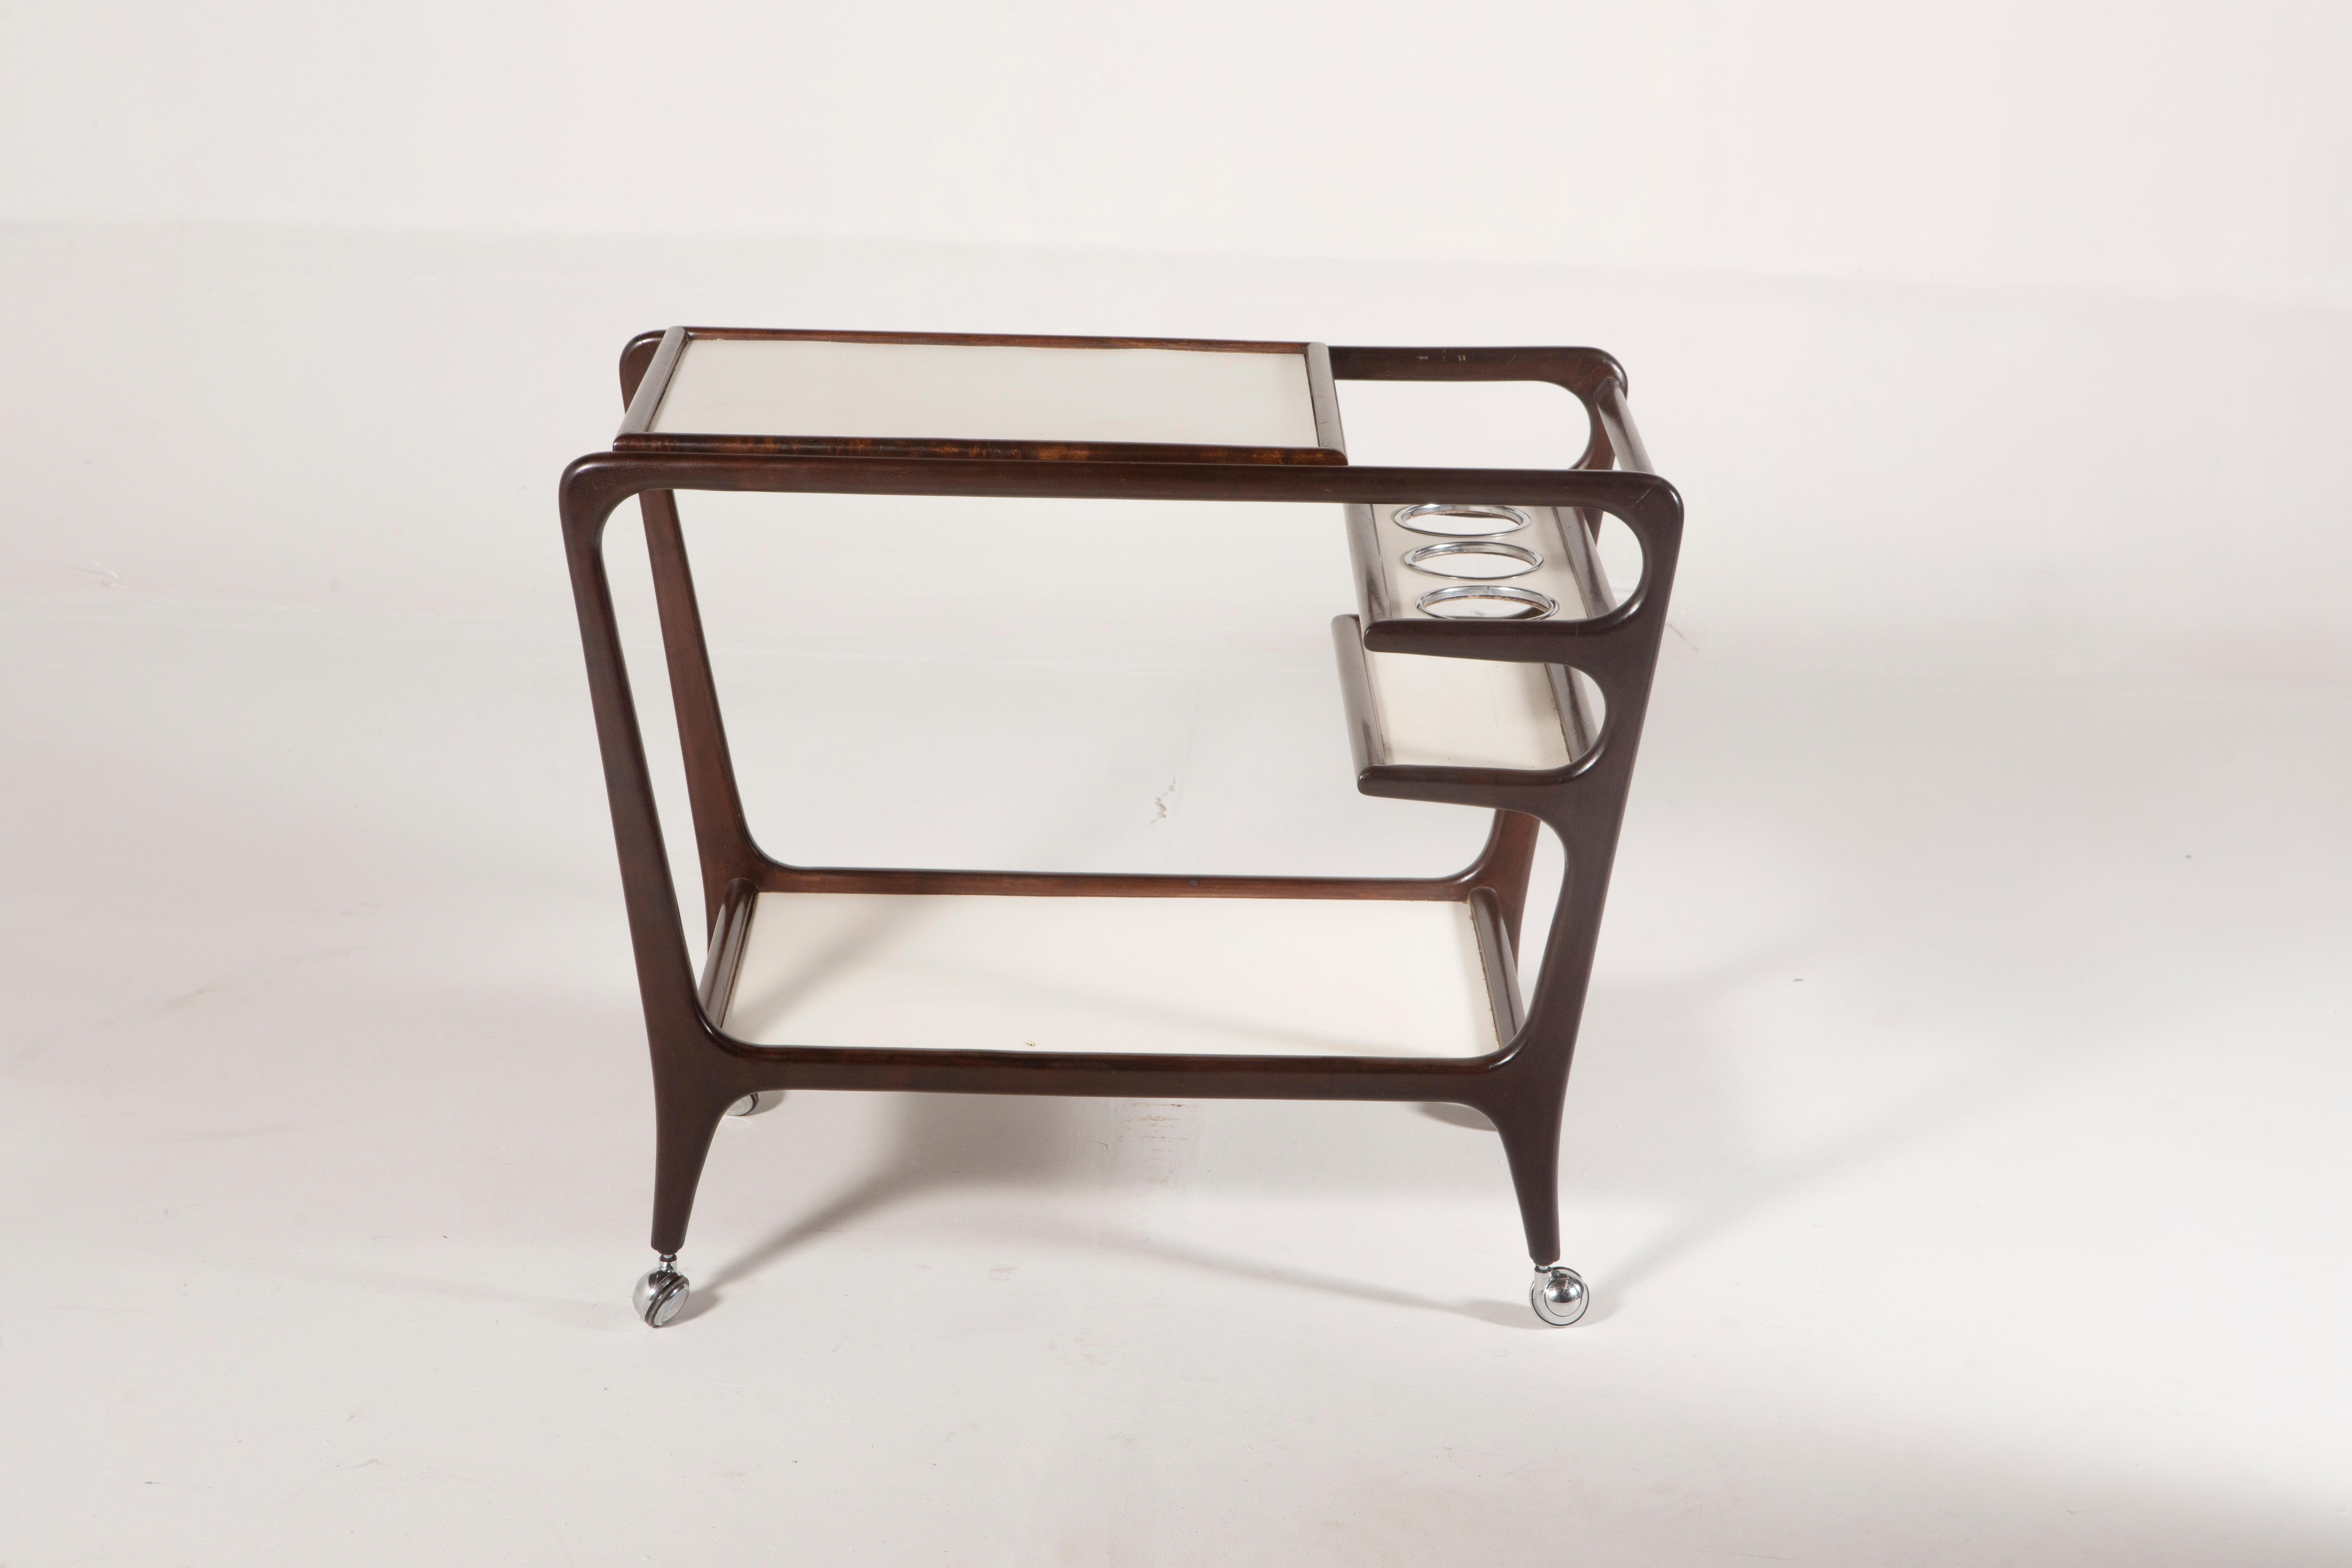 Mid-Century Modern Tea Cart by Geraldo de Barros, 1950s


Geraldo de Barros crafted an ingenious tea cart featuring a unique four-level structure. 
Made of wood with Formica tops, this compact cart stands out with two larger levels at the top and